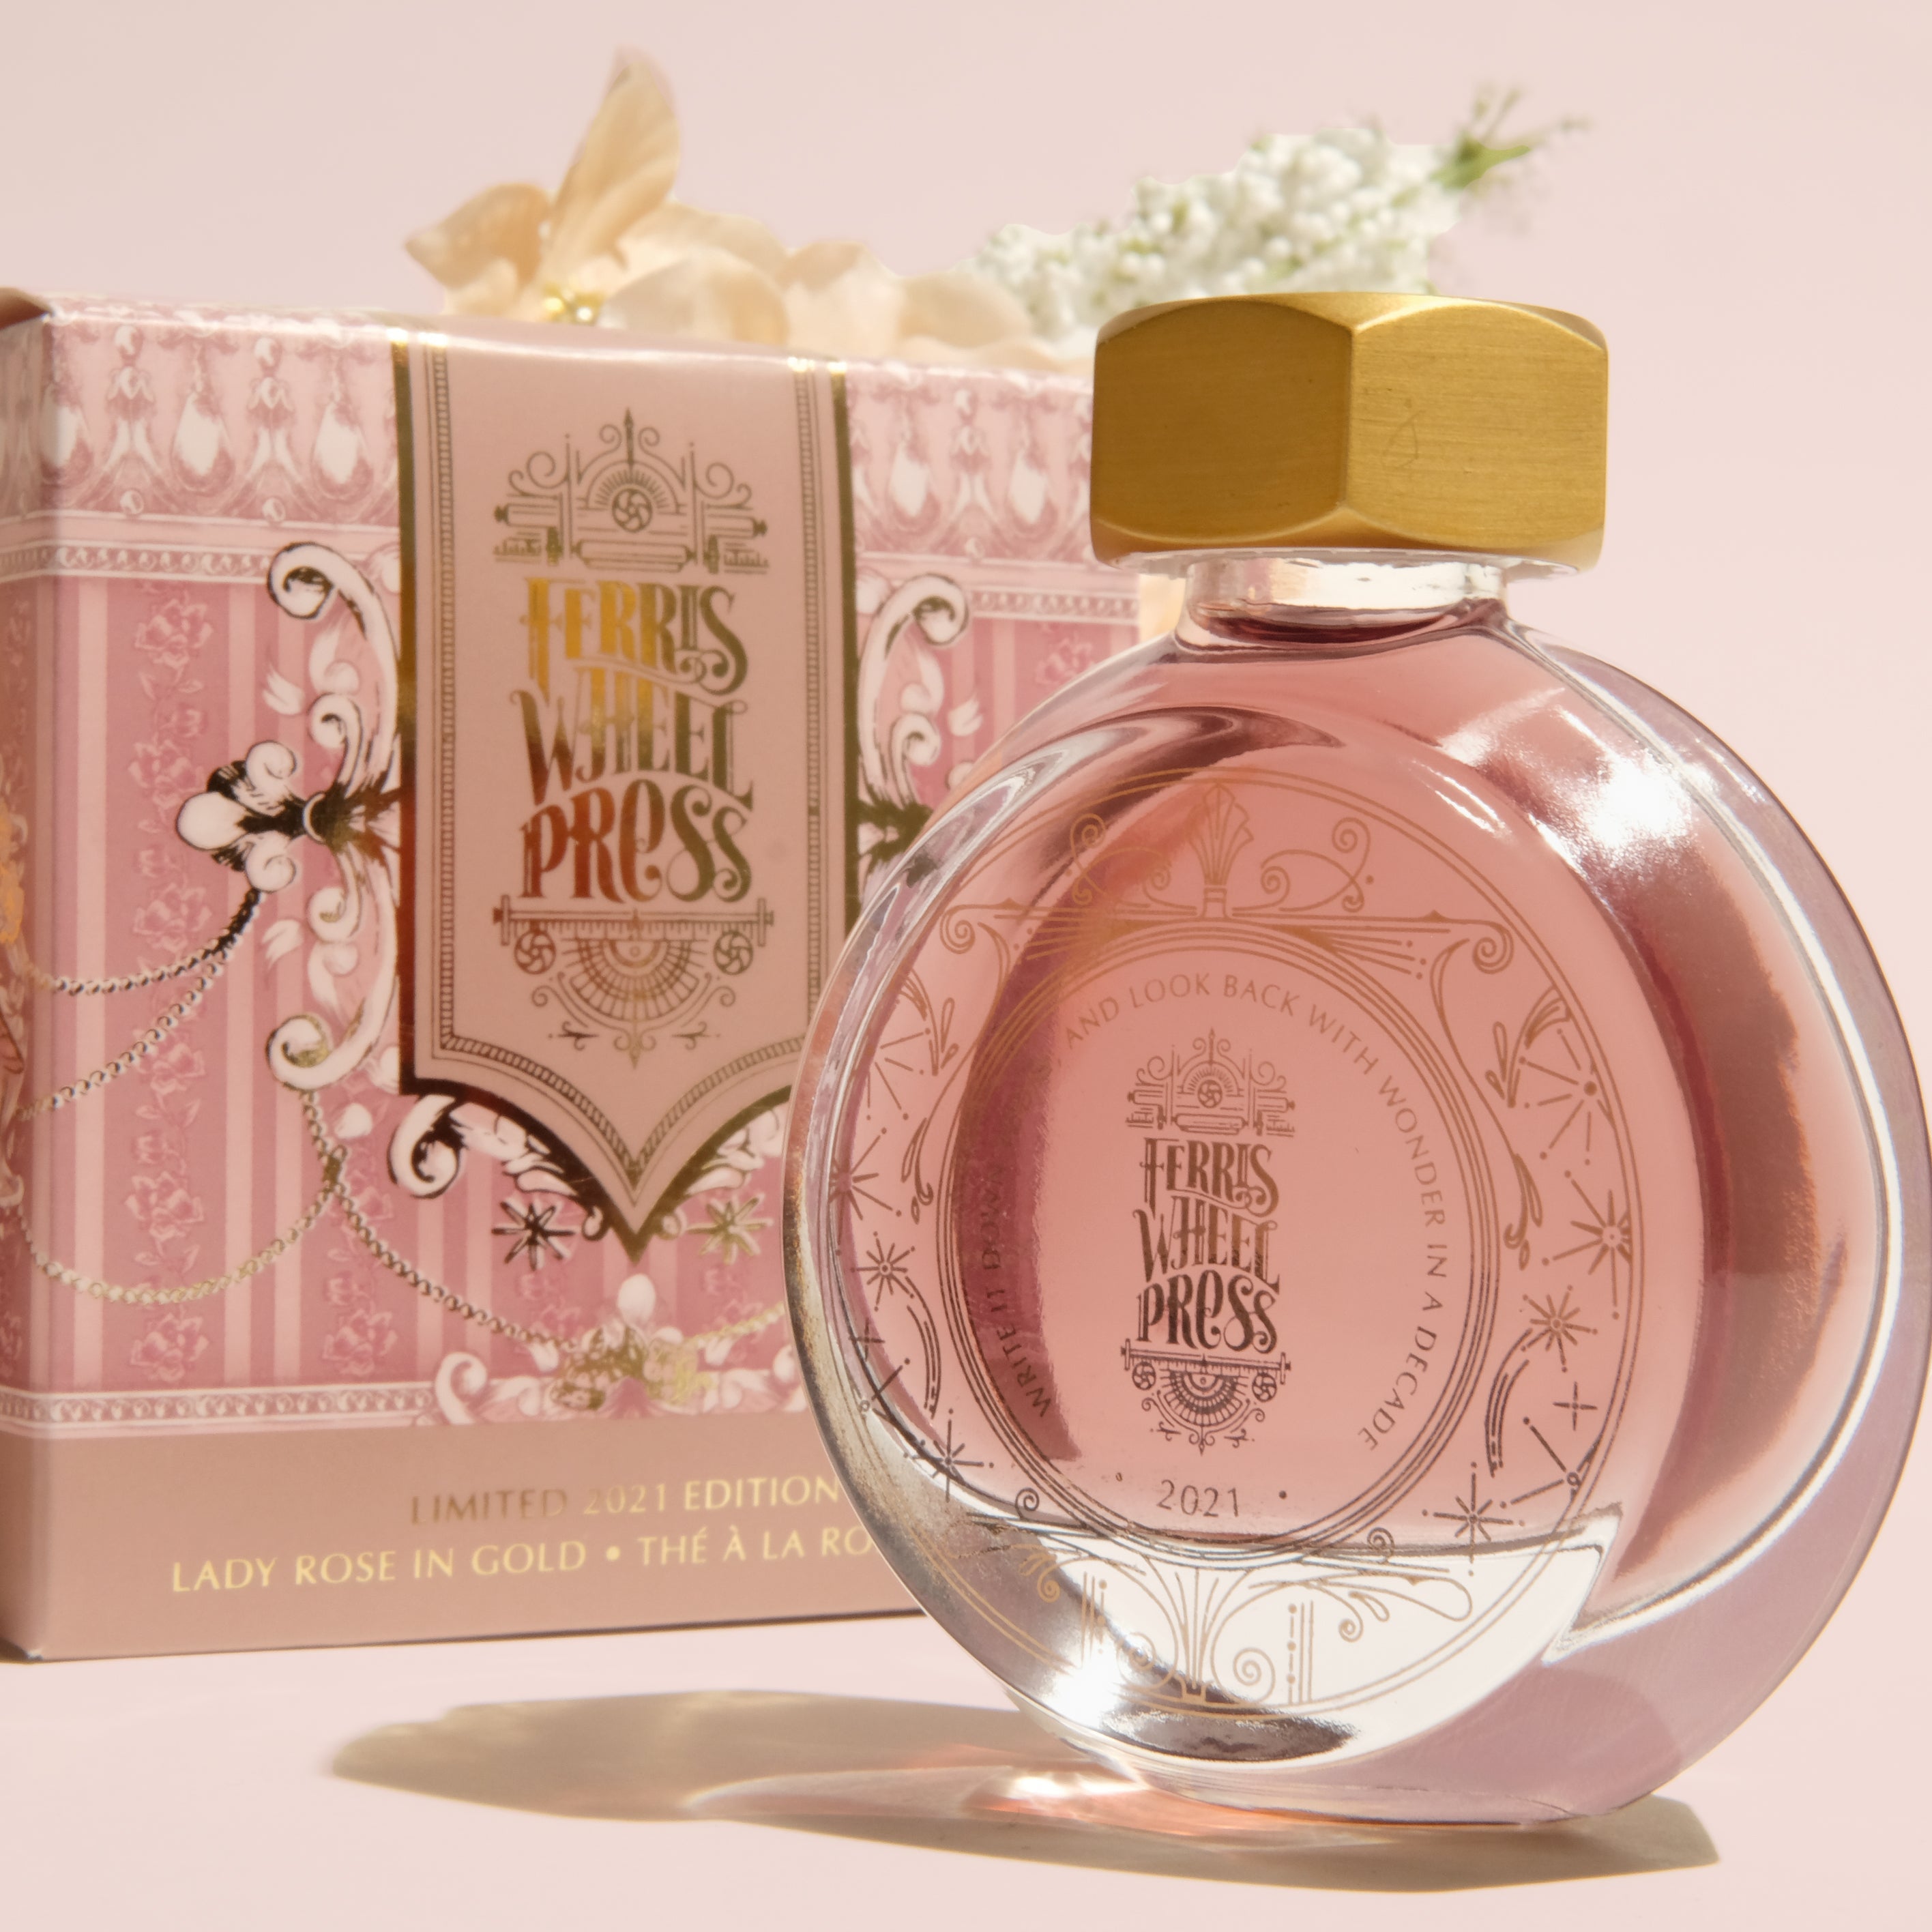 Limited Edition 2021 | Lady Rose in Gold - Ferris Wheel Press